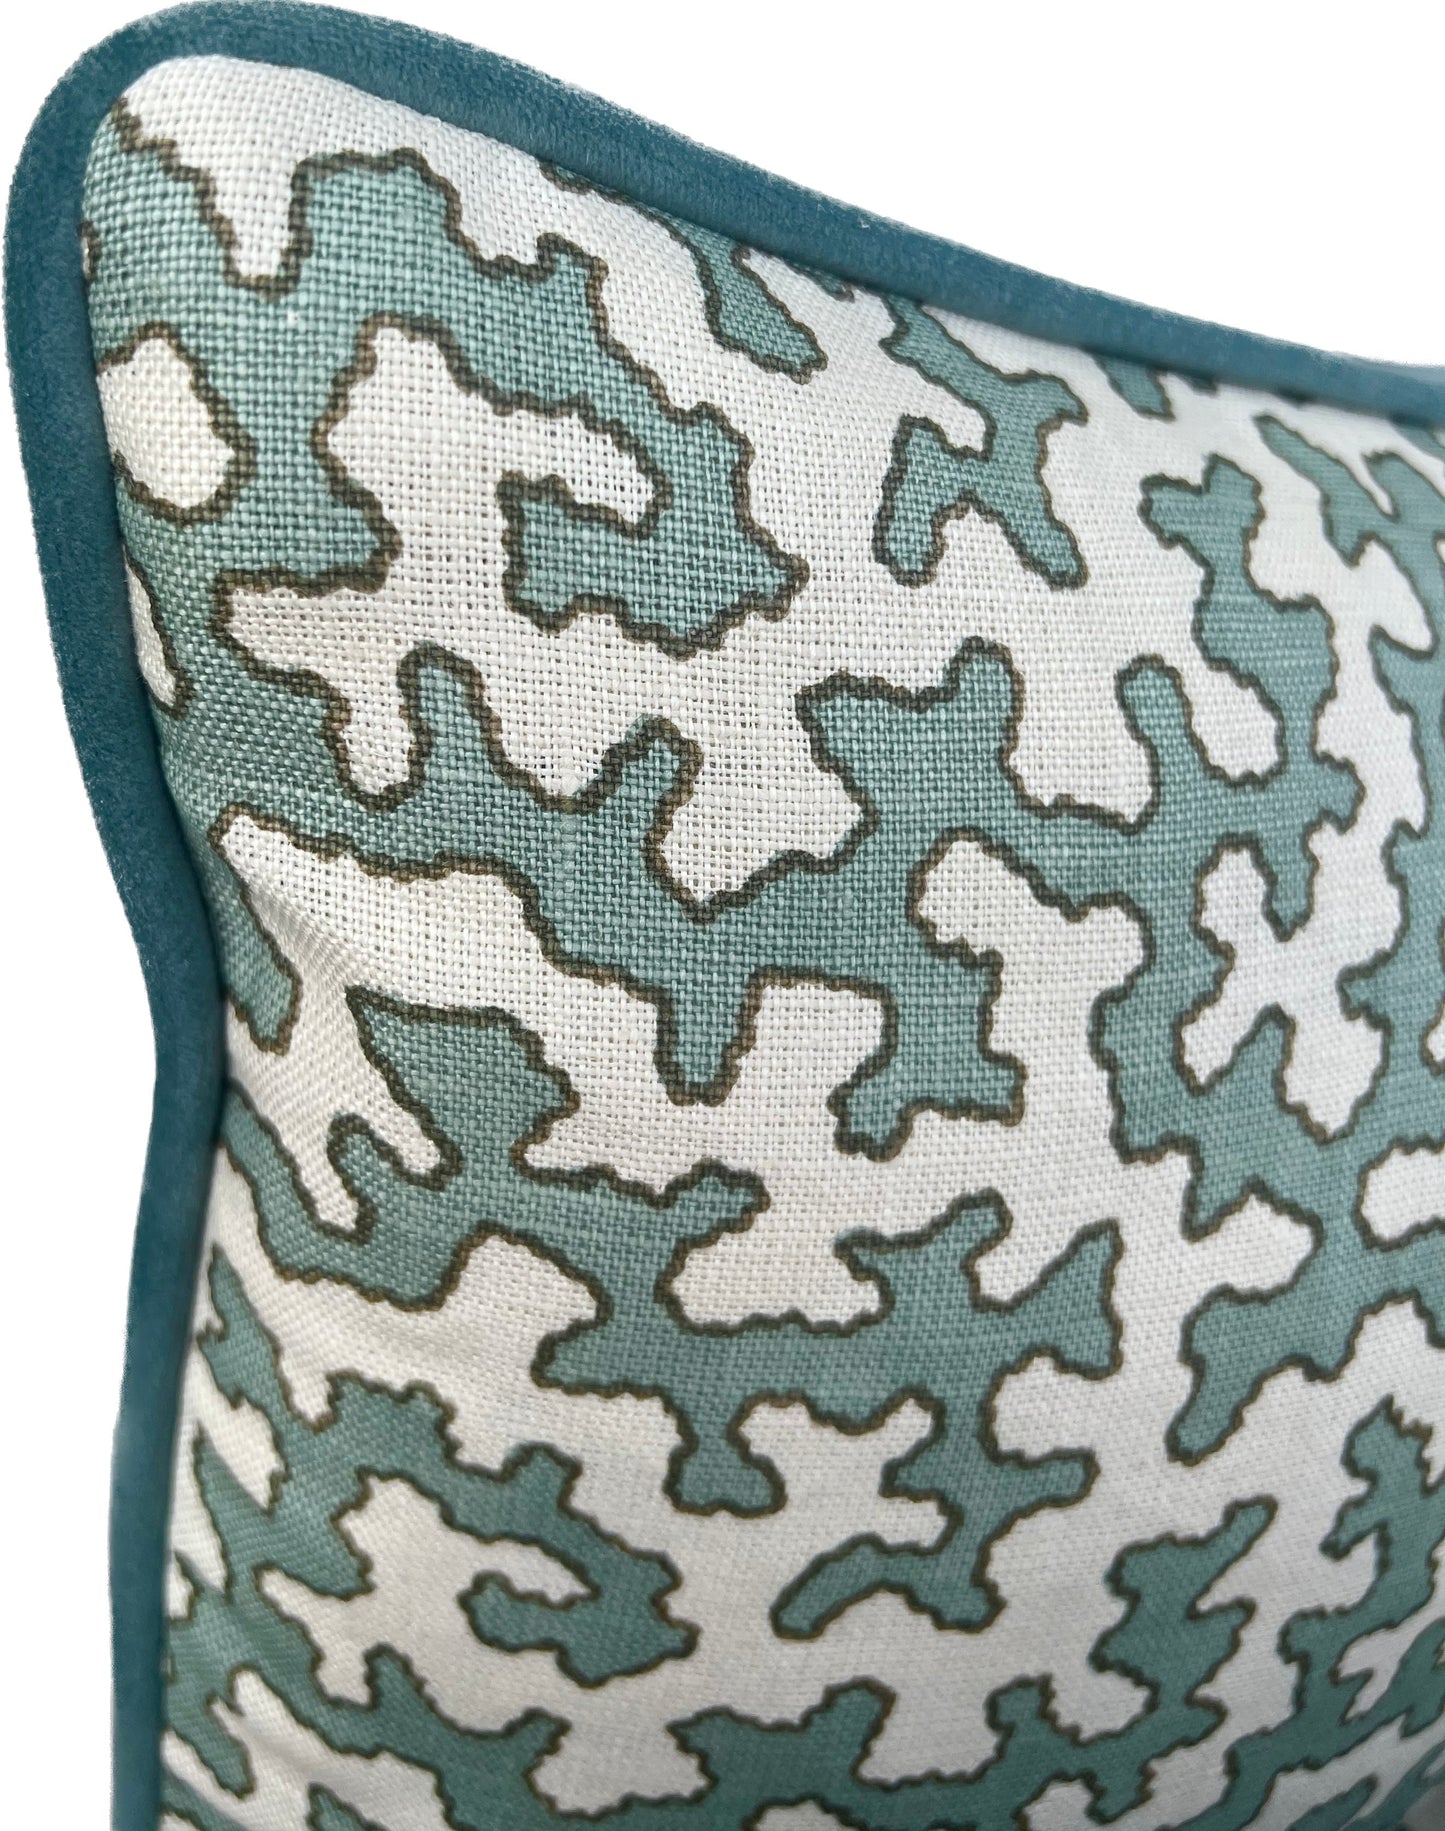 Made to Order Cushions in Colefax & Fowler Squiggle Fabric